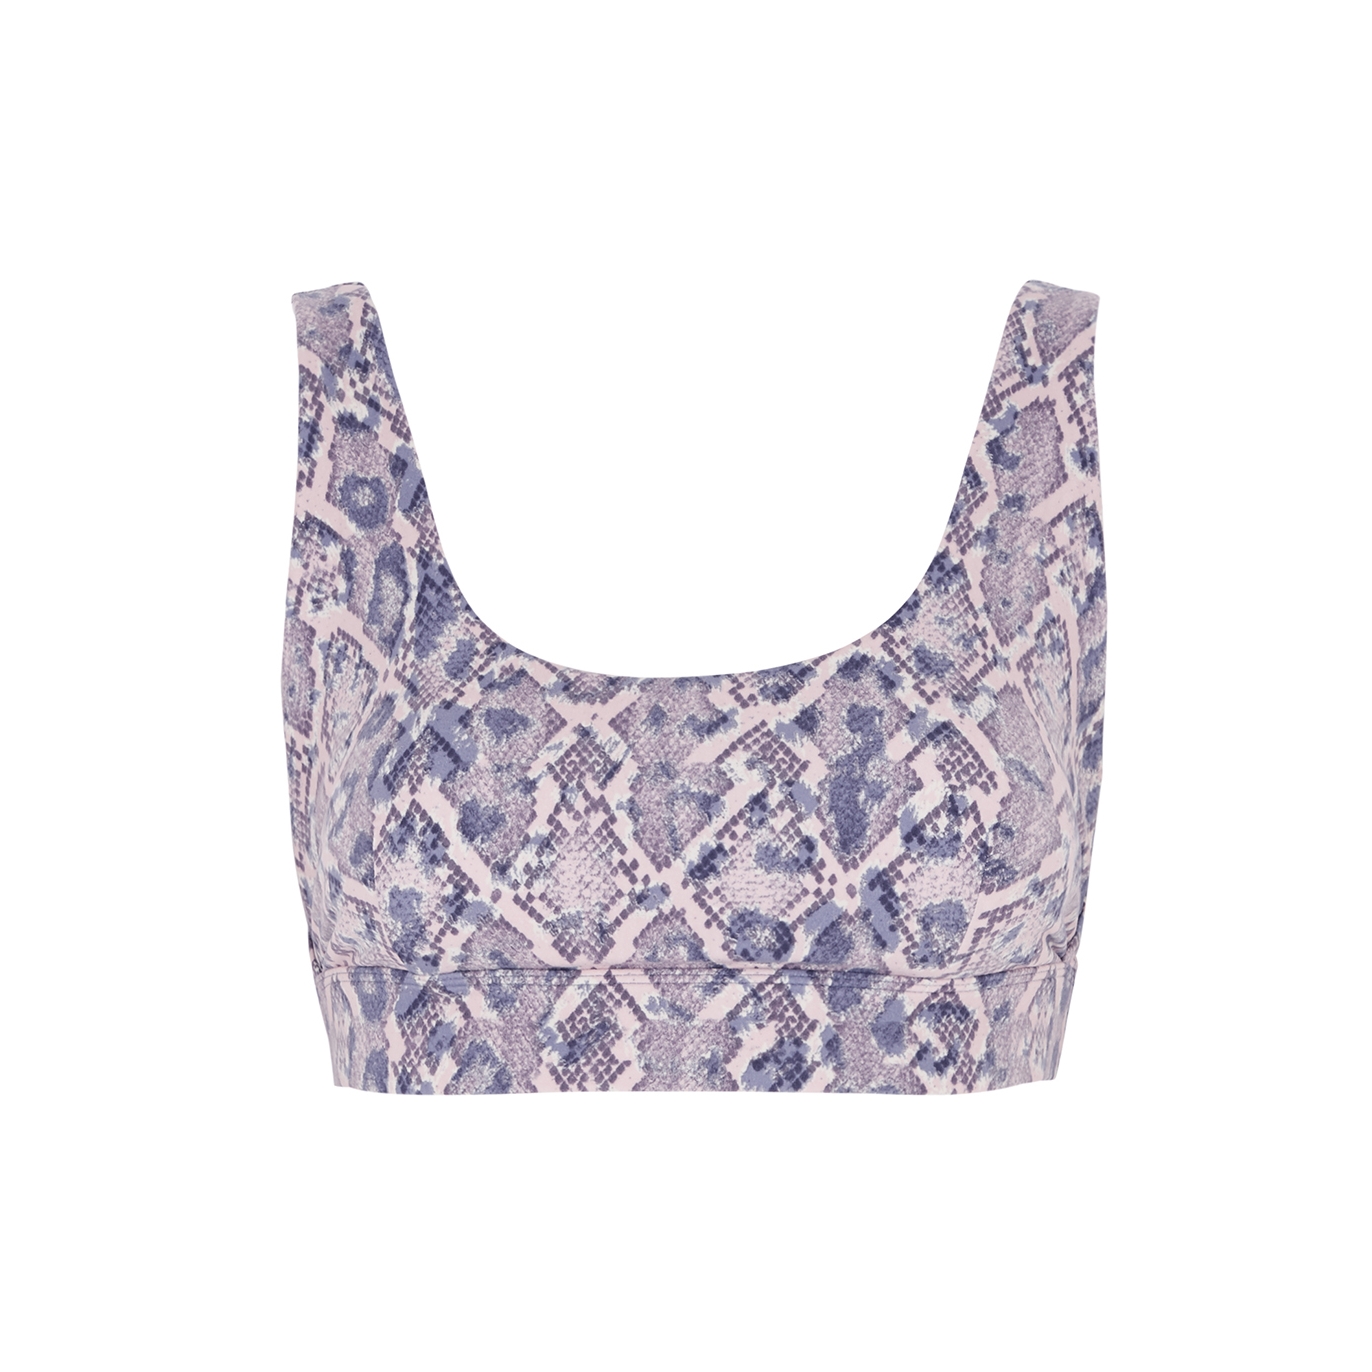 VARLEY LET'S MOVE SEVERN PRINTED STRETCH-JERSEY BRA TOP